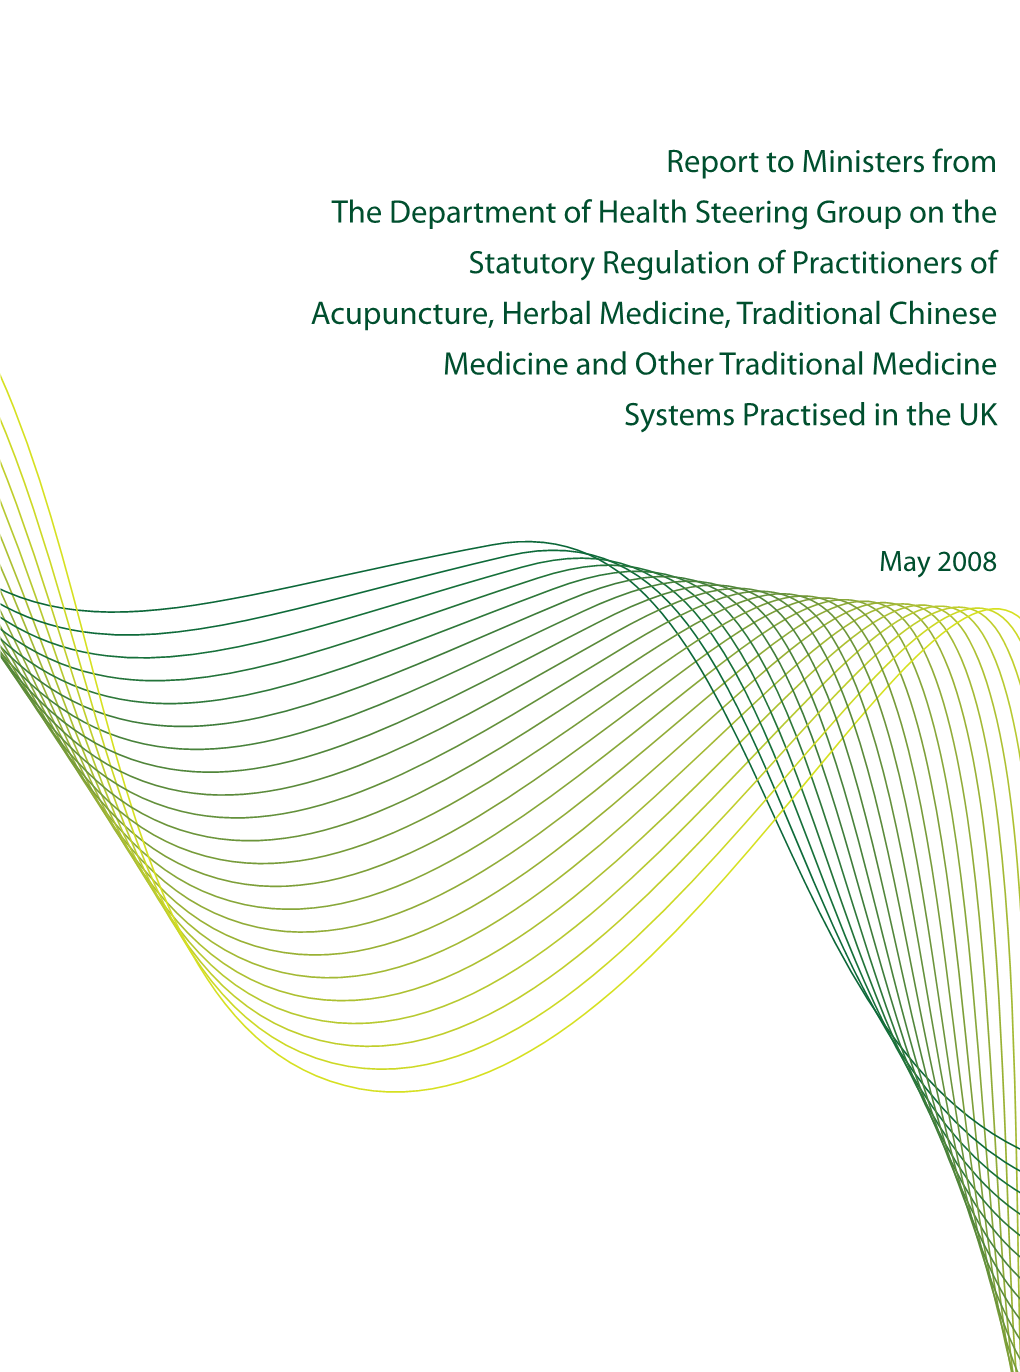 Report to Ministers from the Department of Health Steering Group on the Statutory Regulation of Practitioners of Acupuncture, He